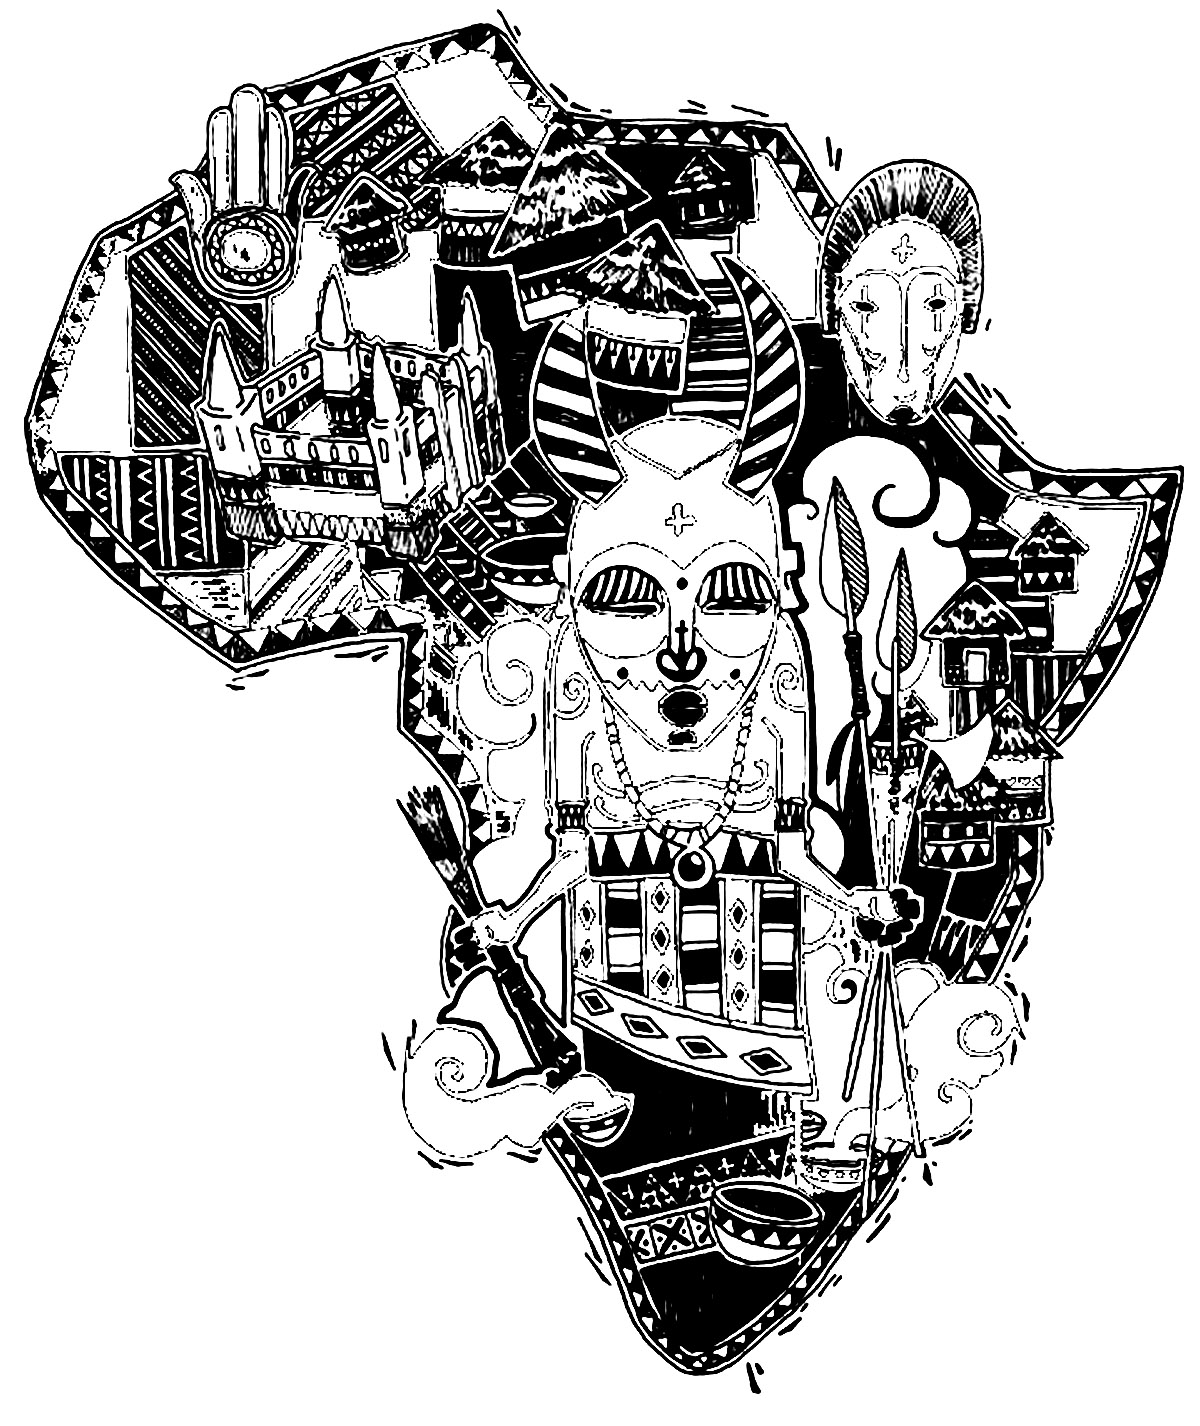 africa map coloring page